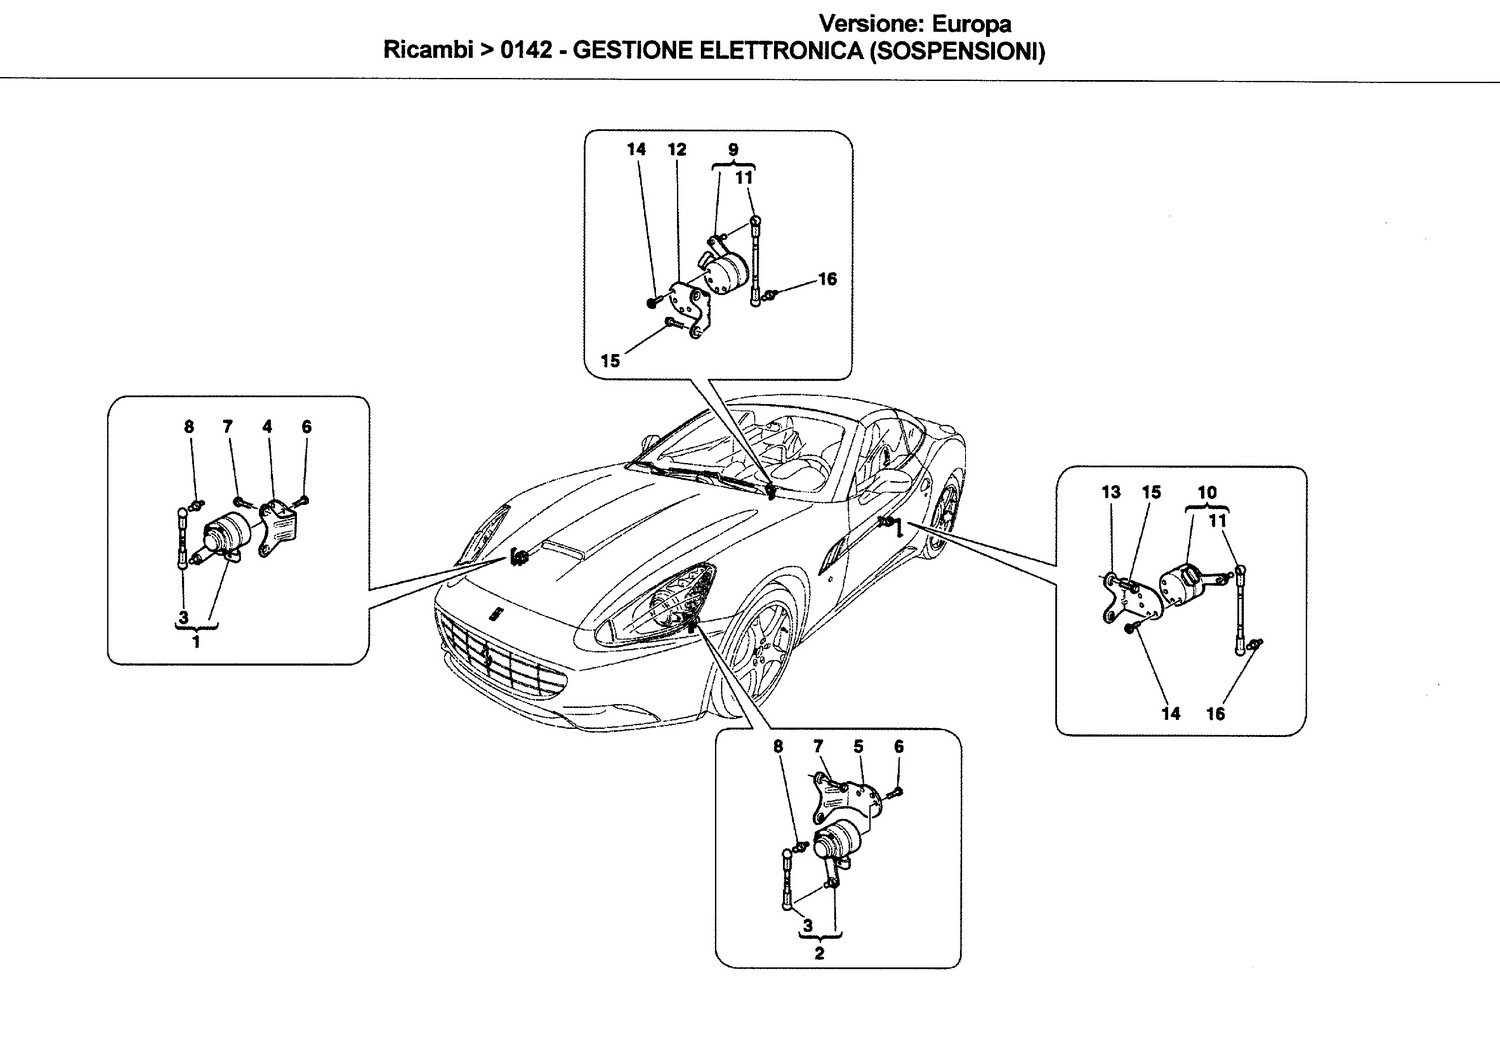 ELECTRONIC CONTROL (SUSPENSION)